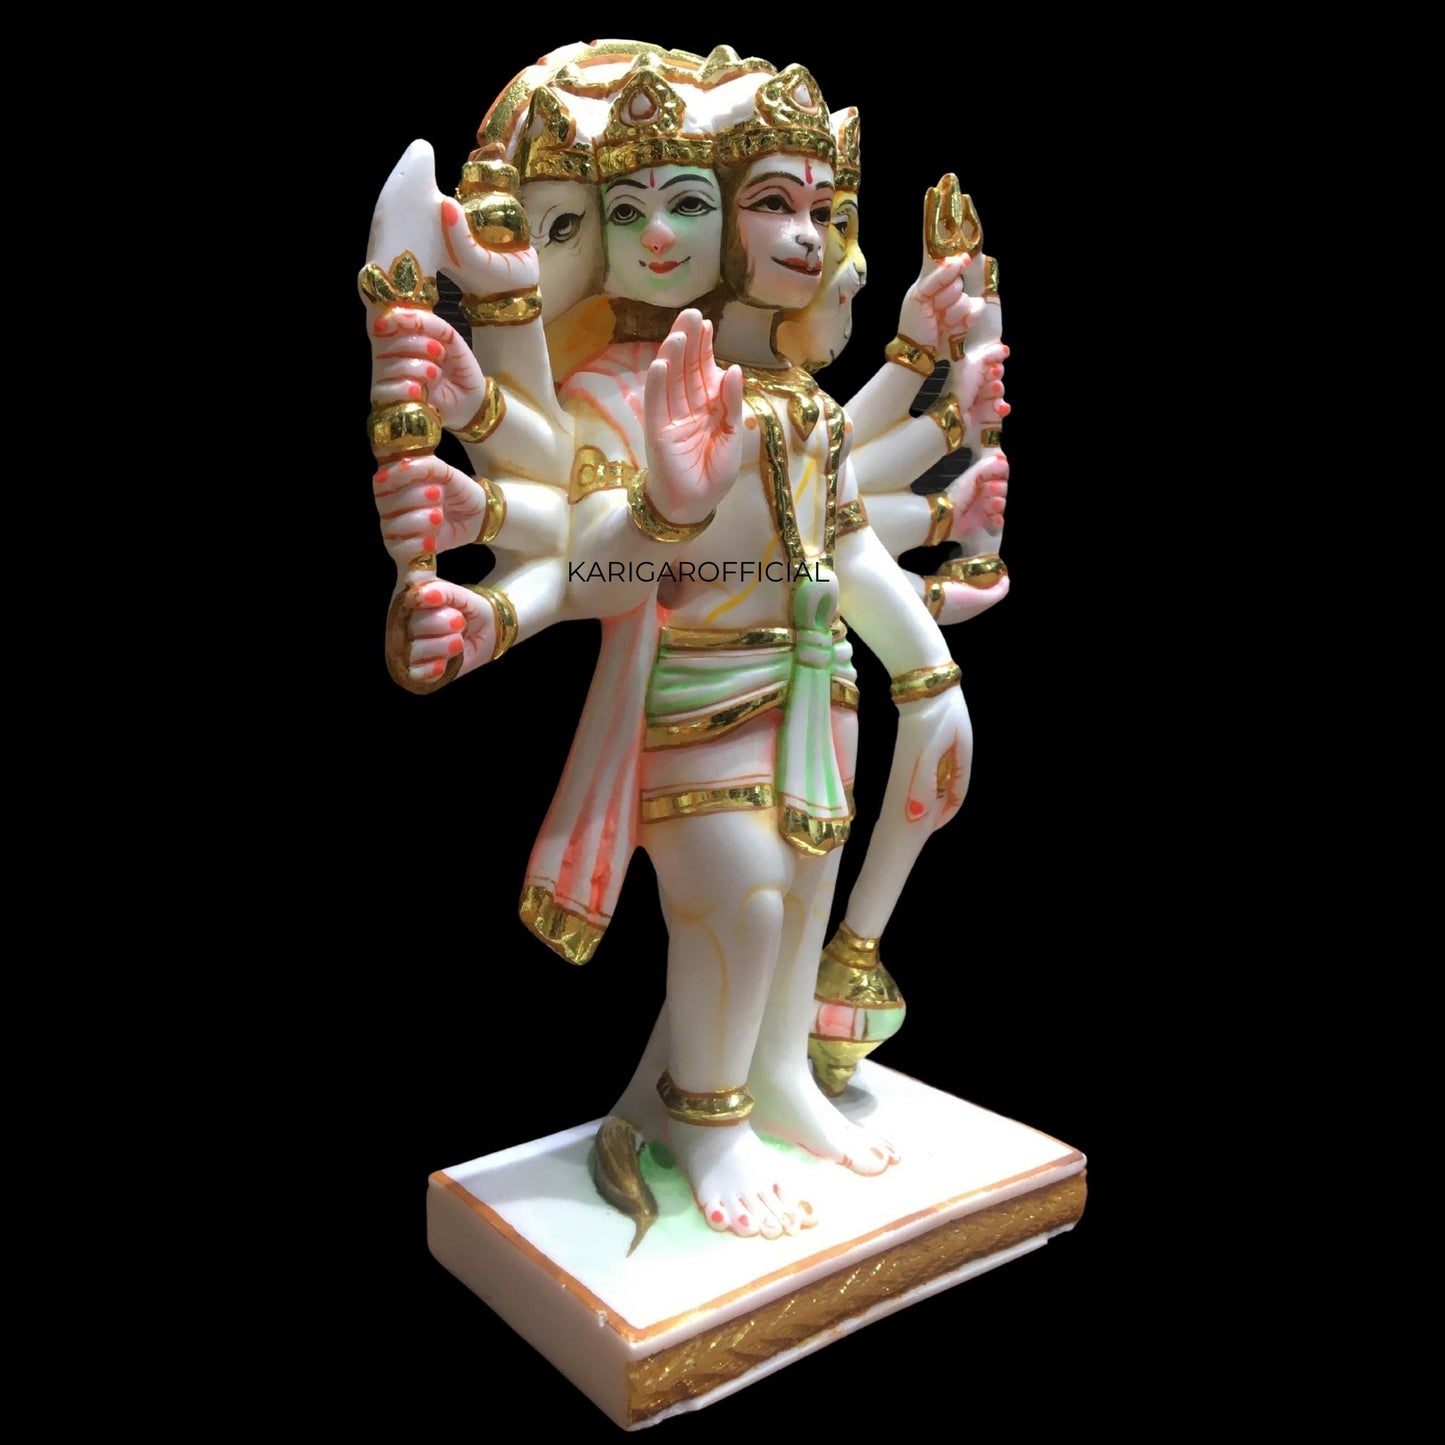 Panchmukhi Hanuman Statue, Multicolor 9 inches Hand Painted Marble Blessing 5 Faces Bajrang Bali Figurine, Powerlifter Hindu Monkey god of Devotion, Strength, Perfect for Small Home Temple Decoration